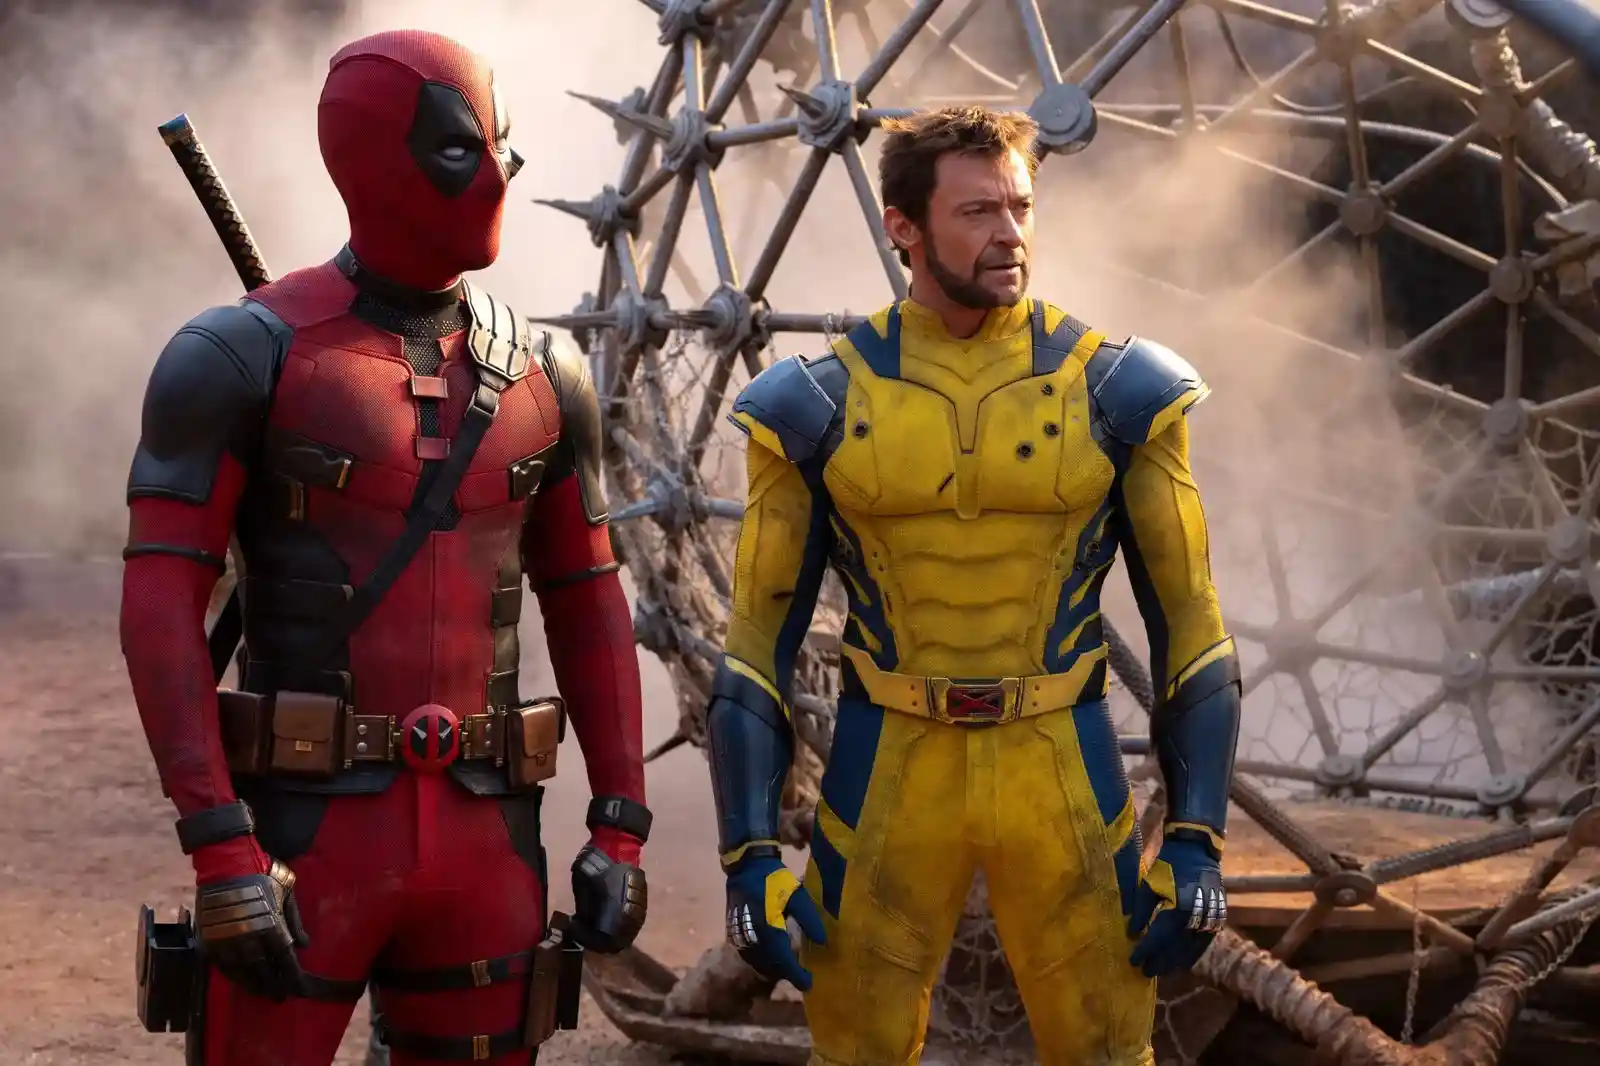 ‘Deadpool And Wolverine’ Day 1 Box Office Collection: Ryan Reynolds, Hugh Jackman’s Film Opens On A Thunderous Note